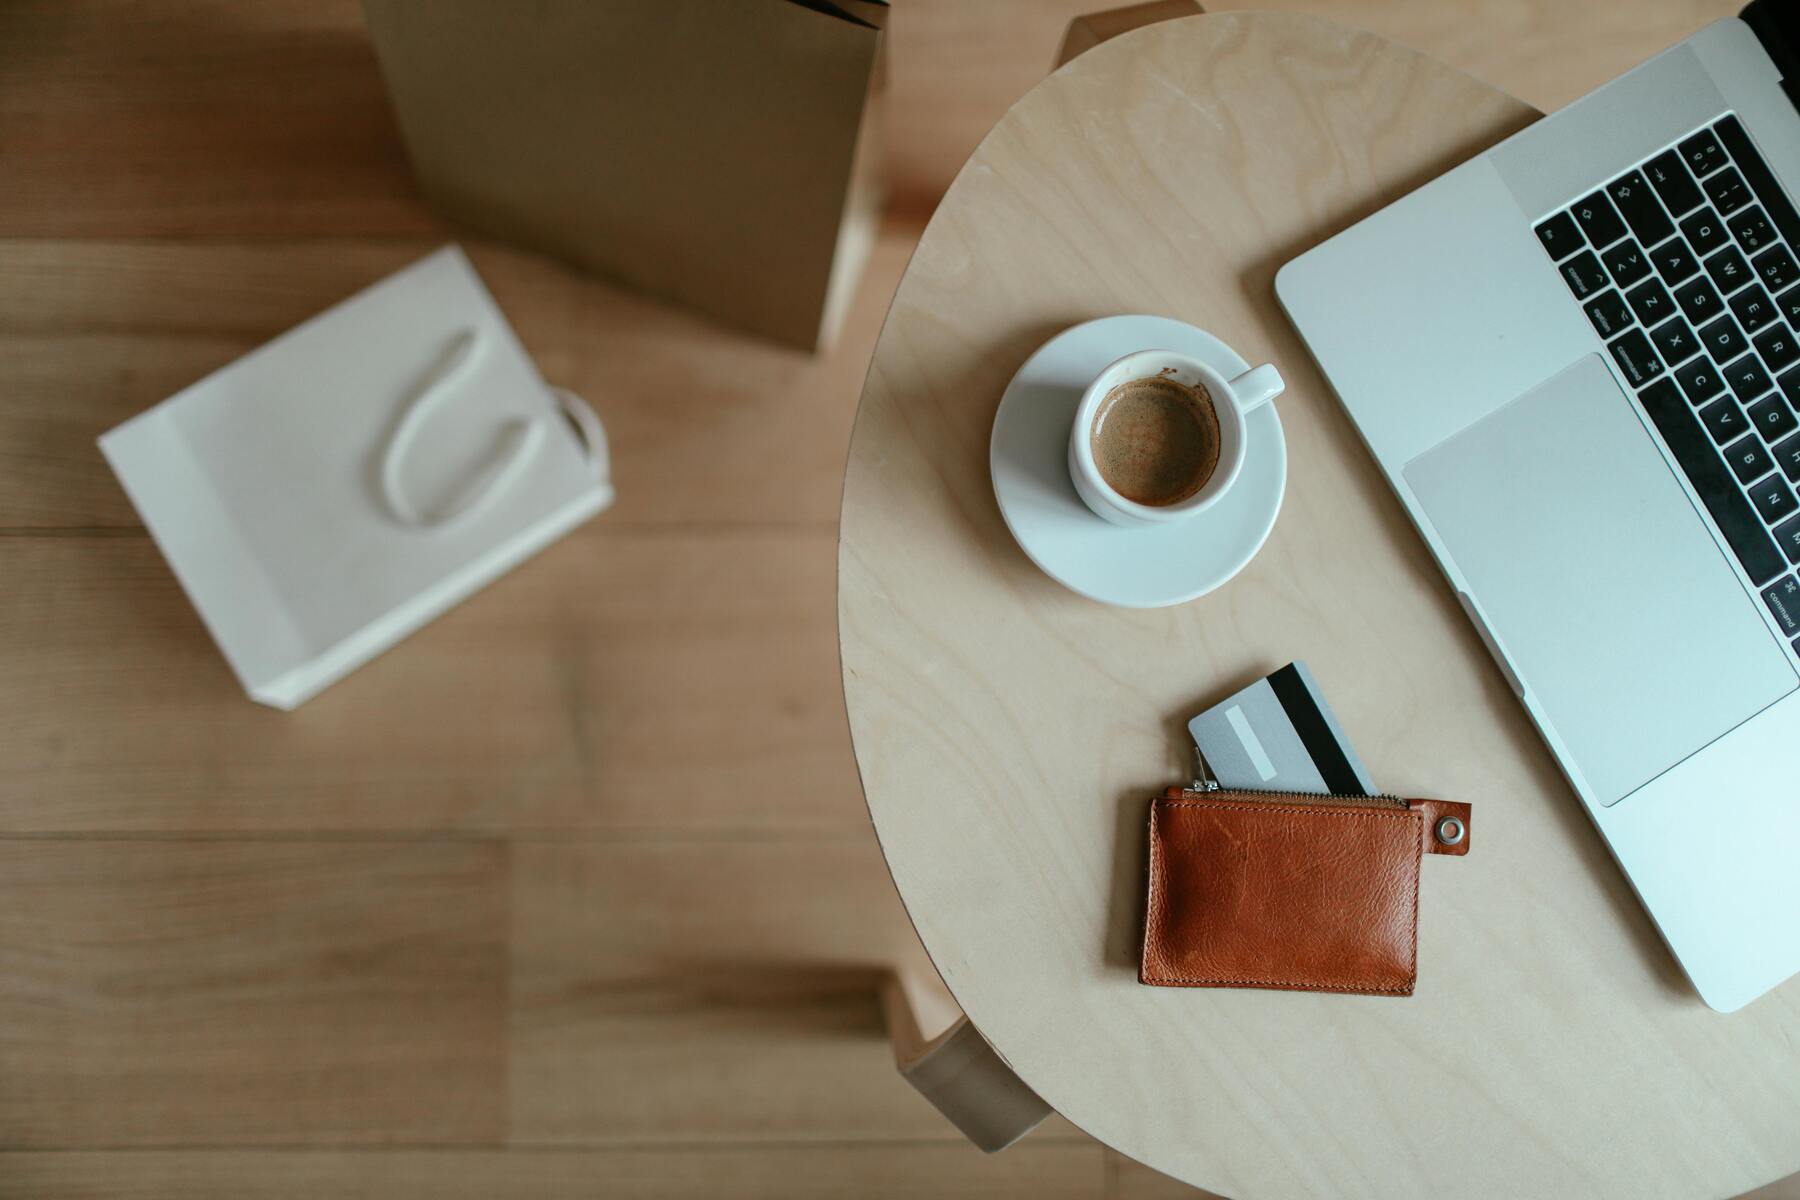 A coffee, wallet with card, and laptop on the table while a shopping bag is on the ground